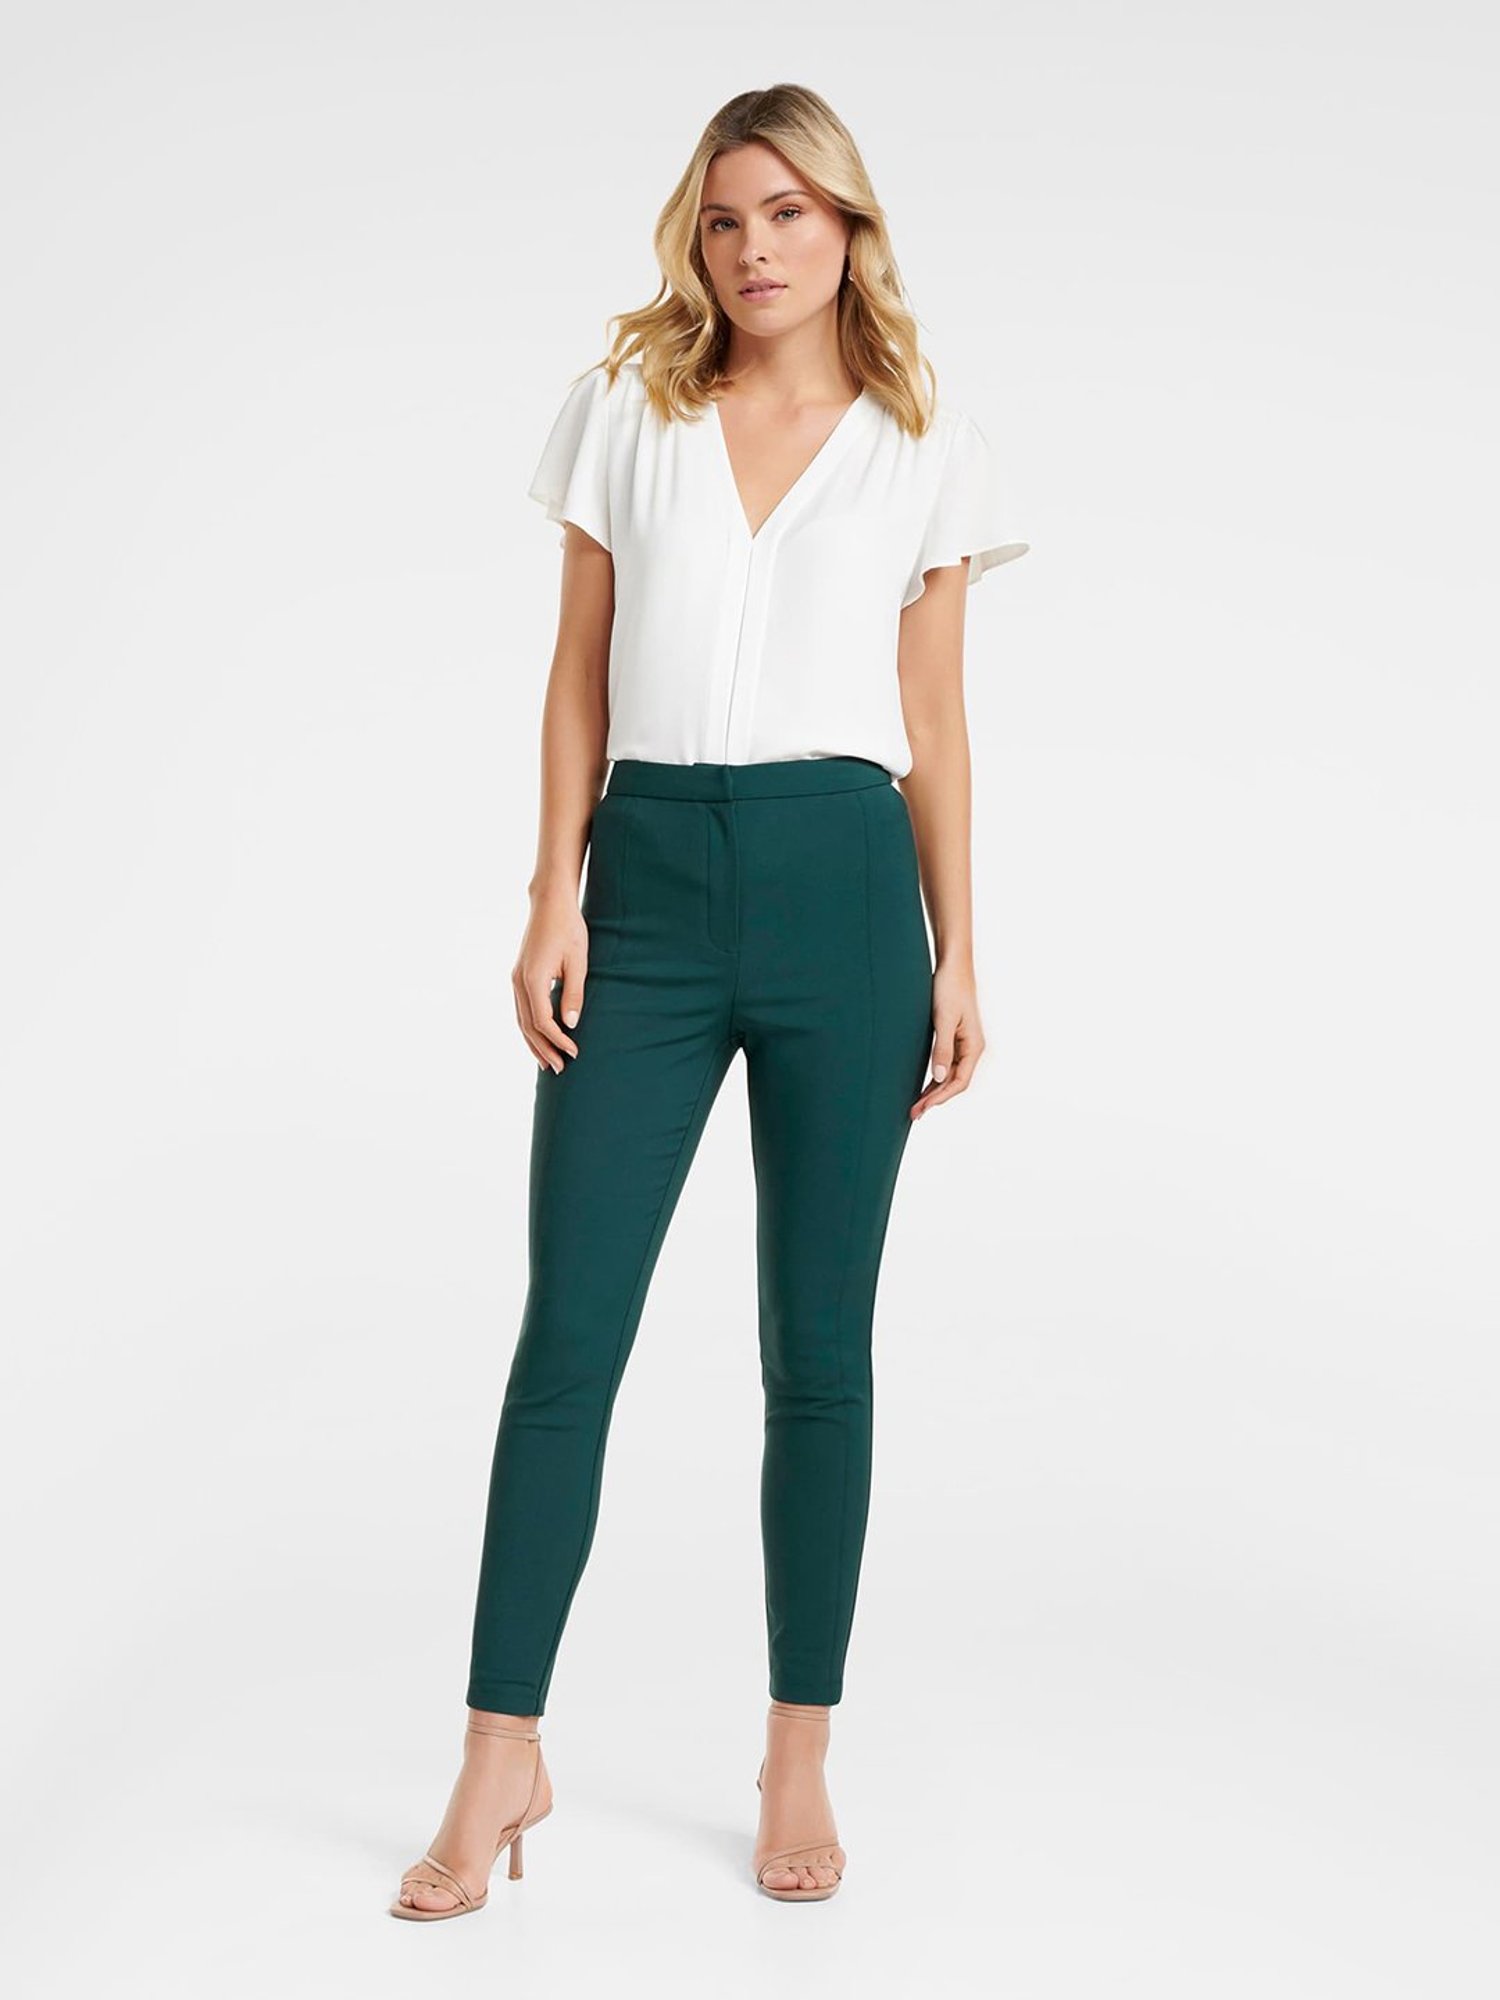 Green Trousers For Women Online  Buy Green Trousers Online in India